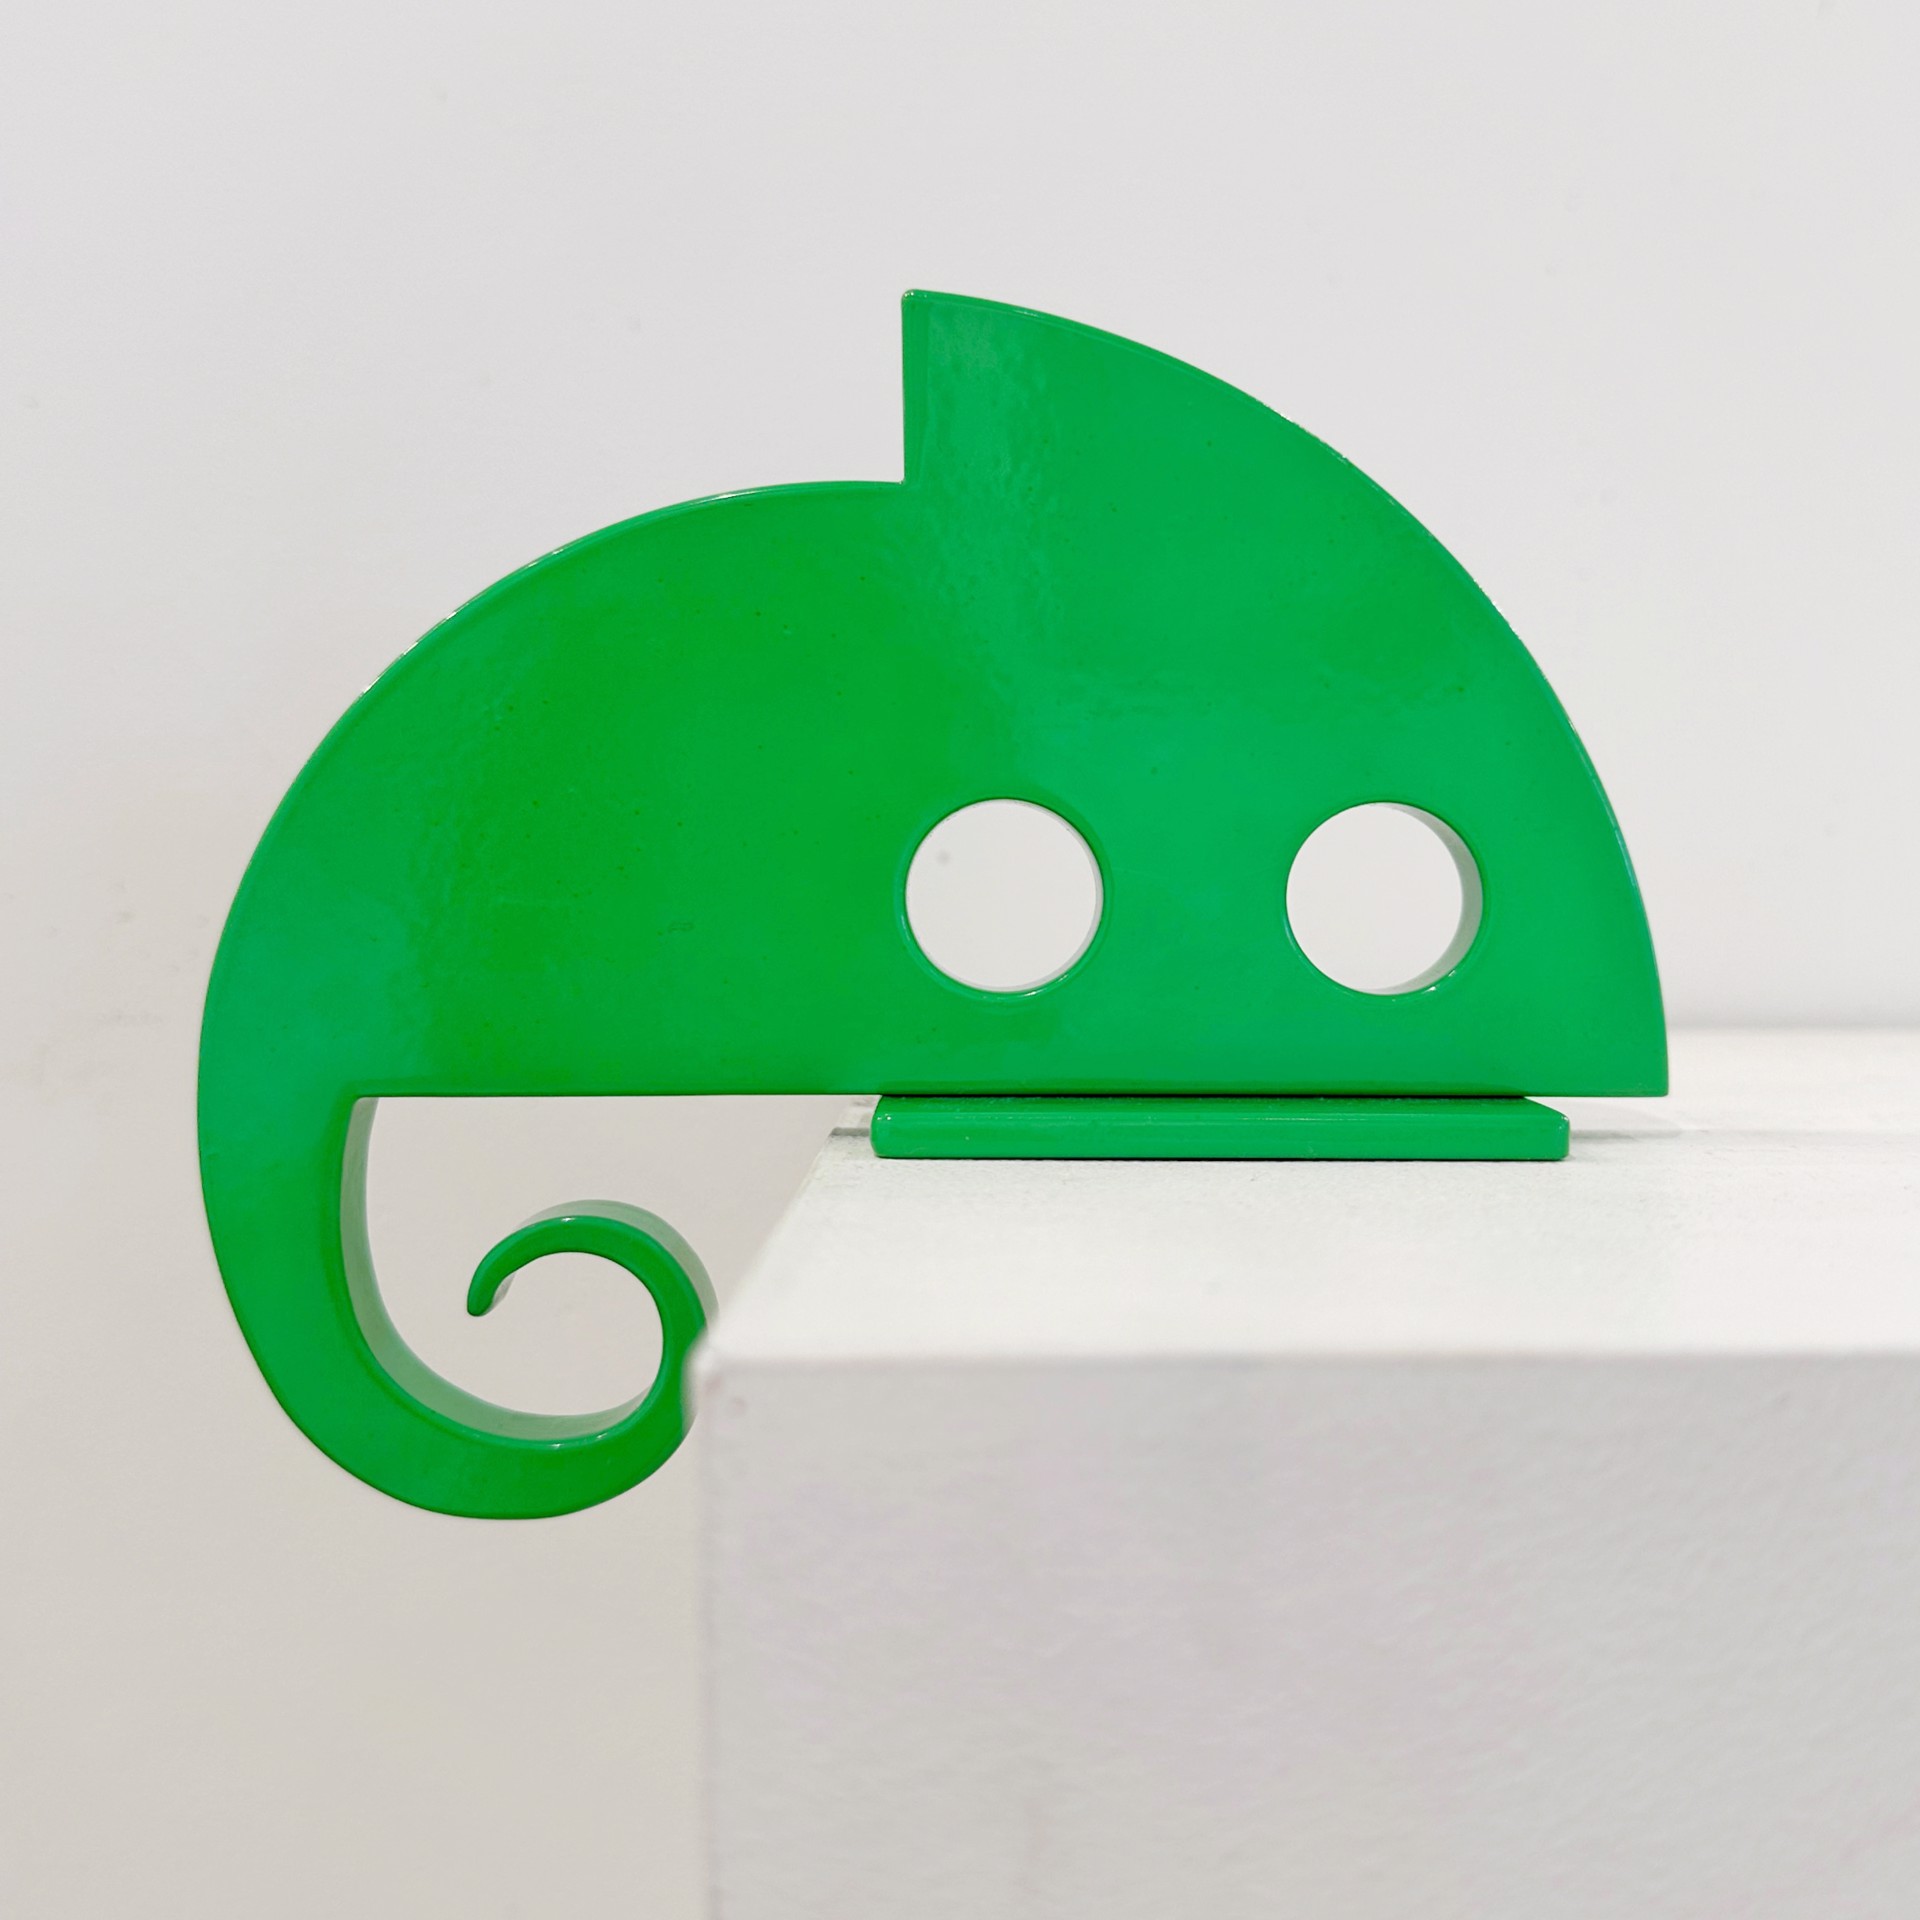 Aluminium Sculpture By Jeffie Brewer Featuring A Chameleon In Simplified Shapes And Green Finish